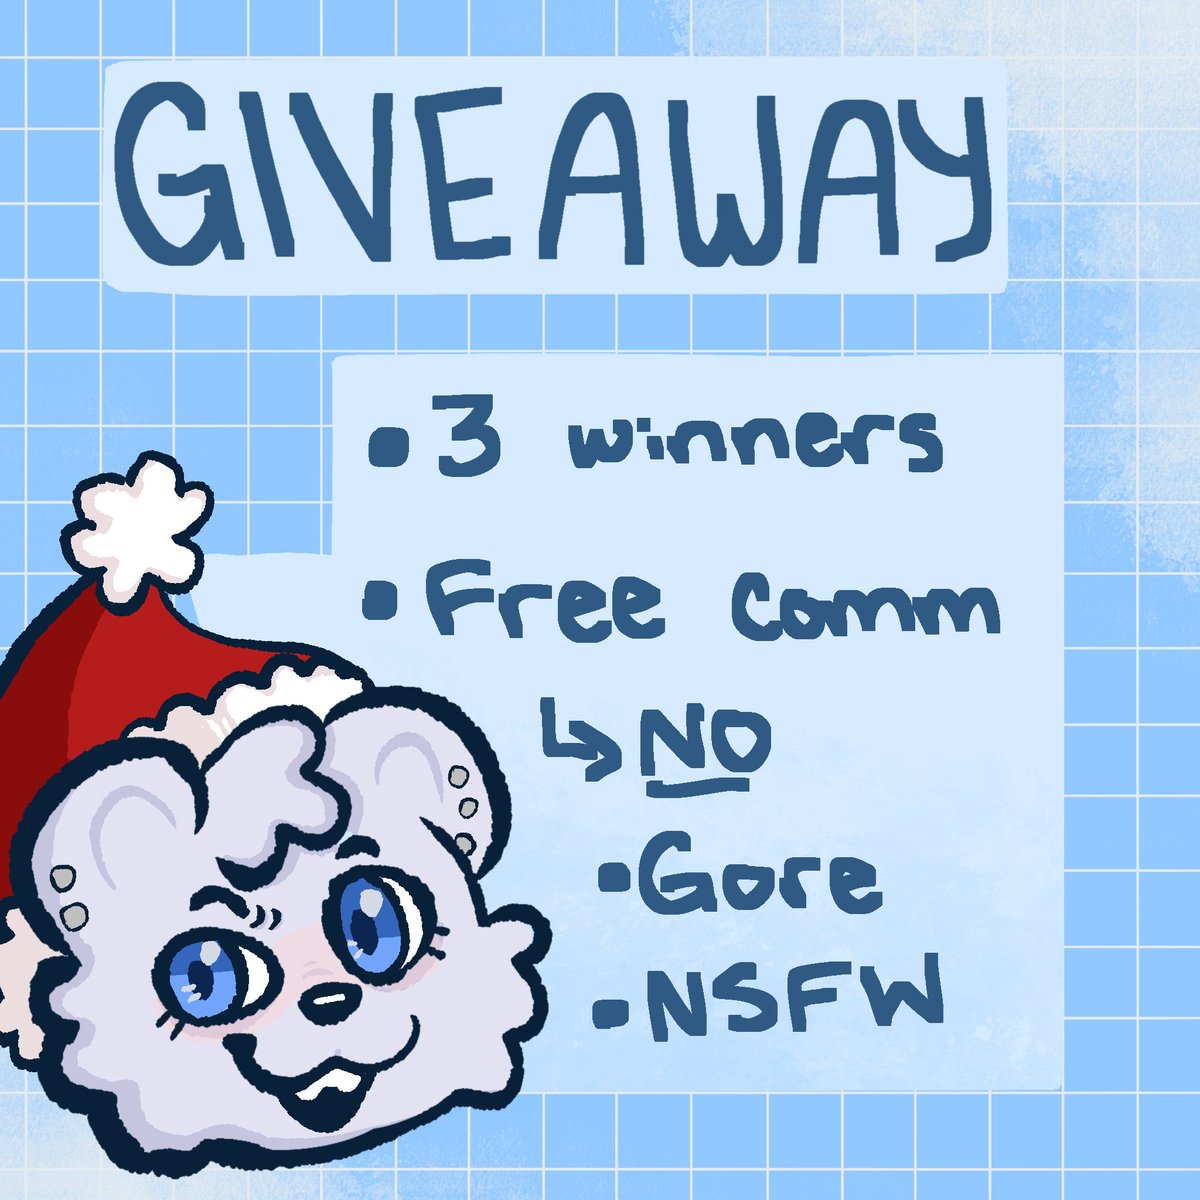 ❄️GIVEAWAY❄️ Gor bored and decided to spread holiday cheer! Just follow and repost to be entered ⛄ This will close Christmas Day! ❄️ GOOD LUCK ❄️